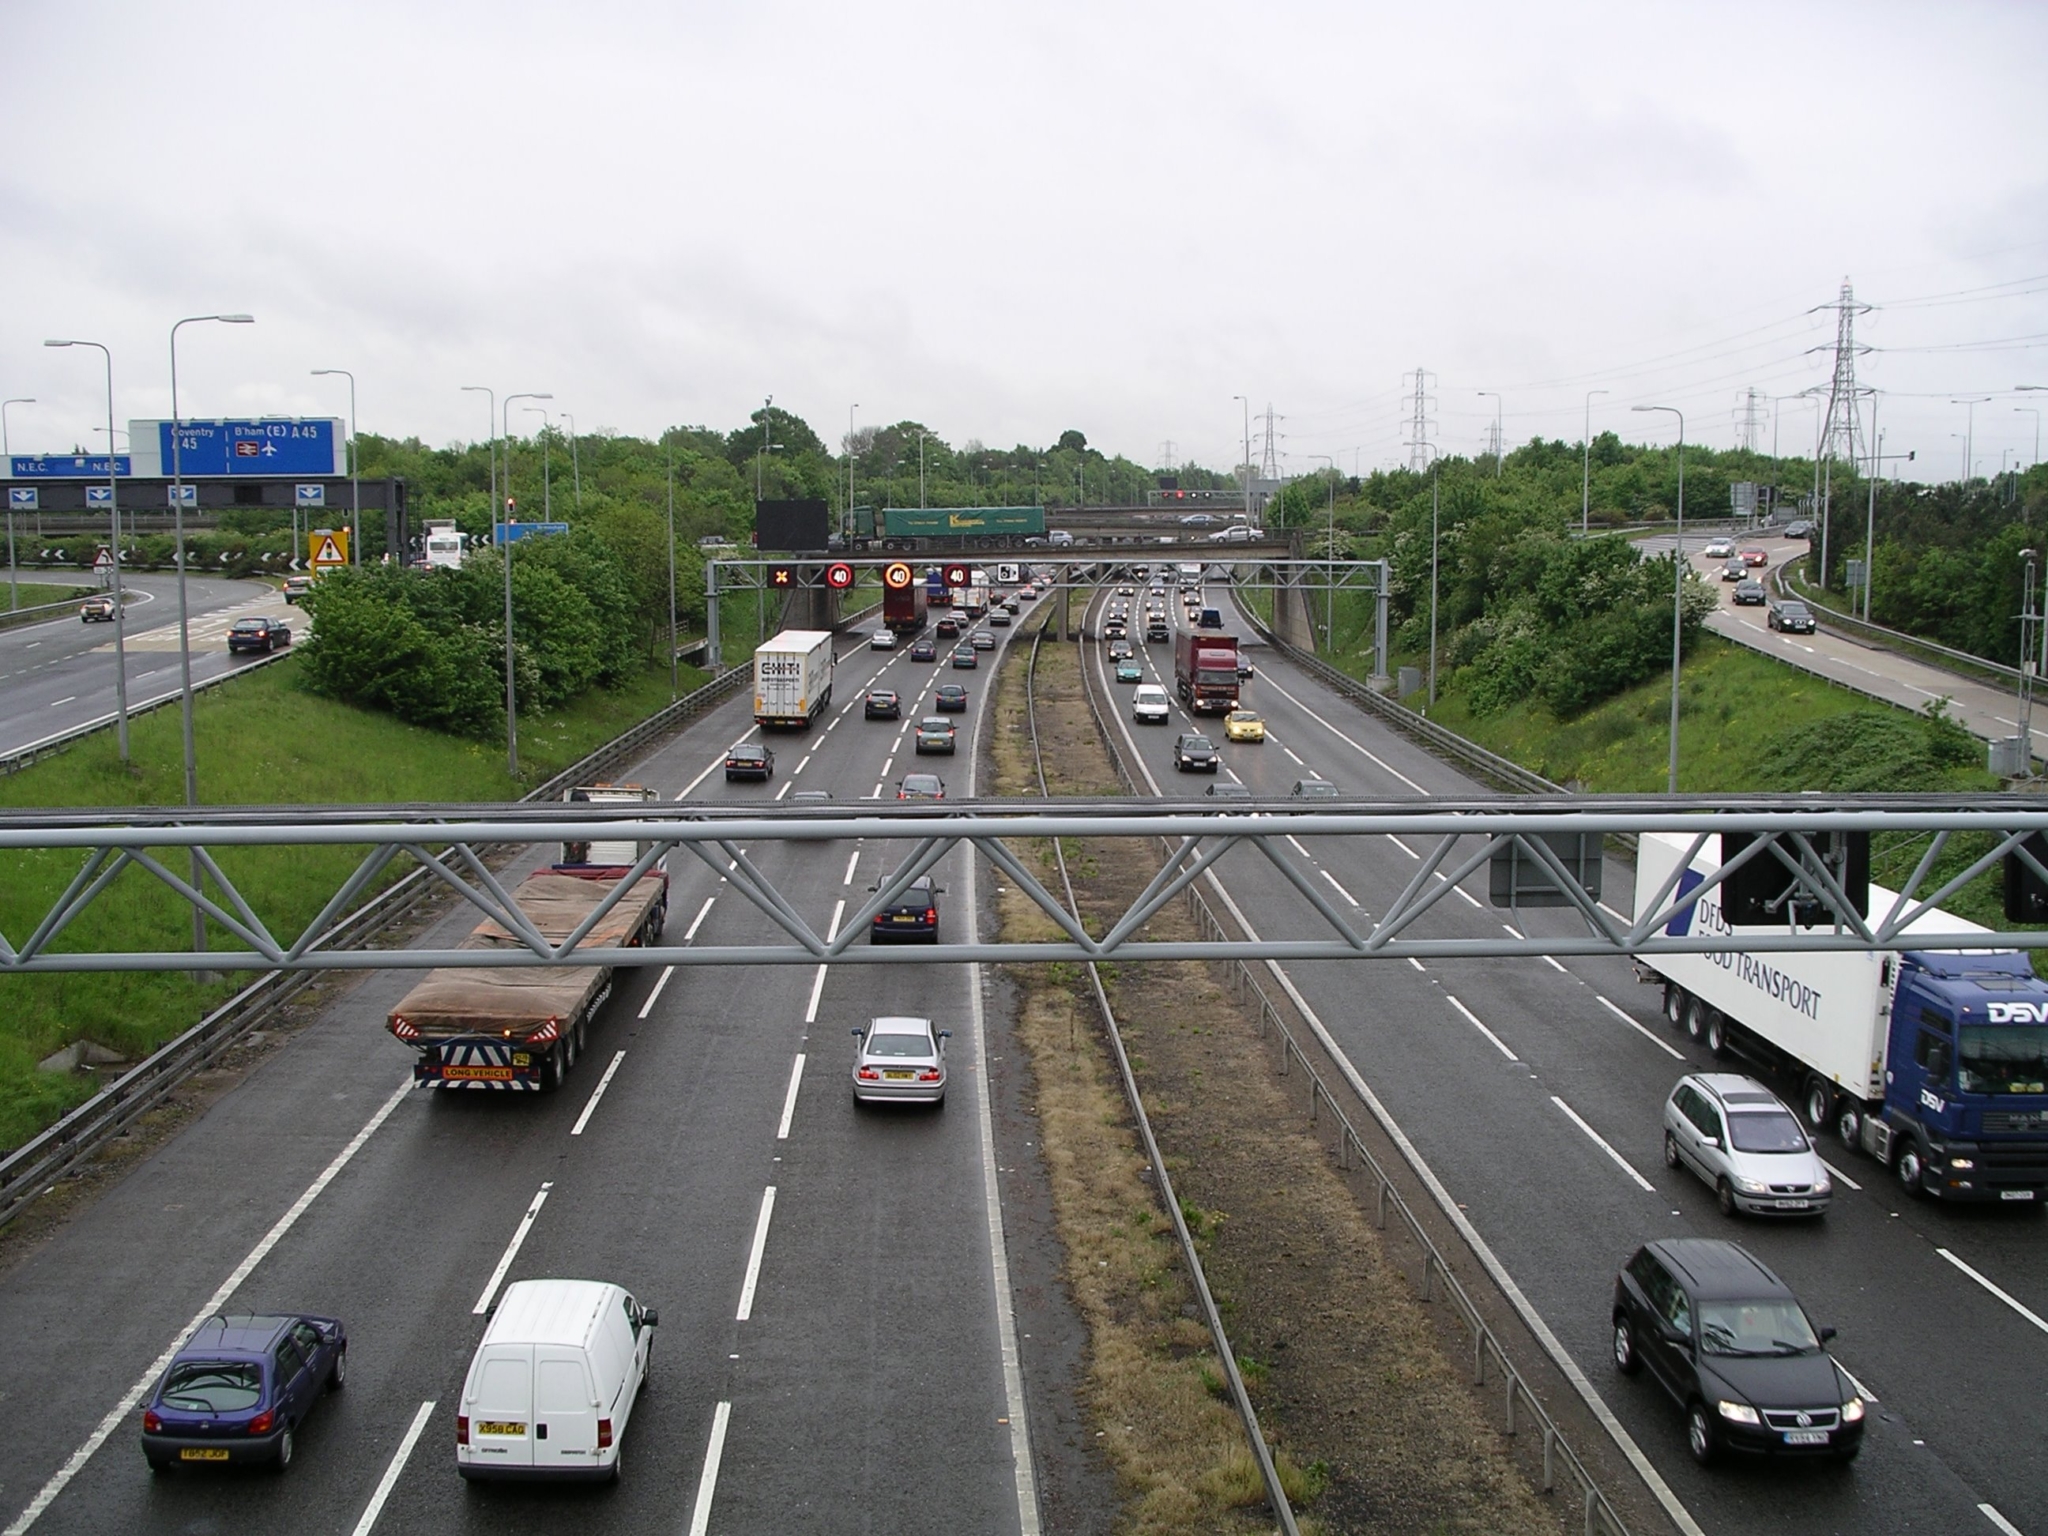 UK drivers welcome smart motorways to reduce congestion and emissions